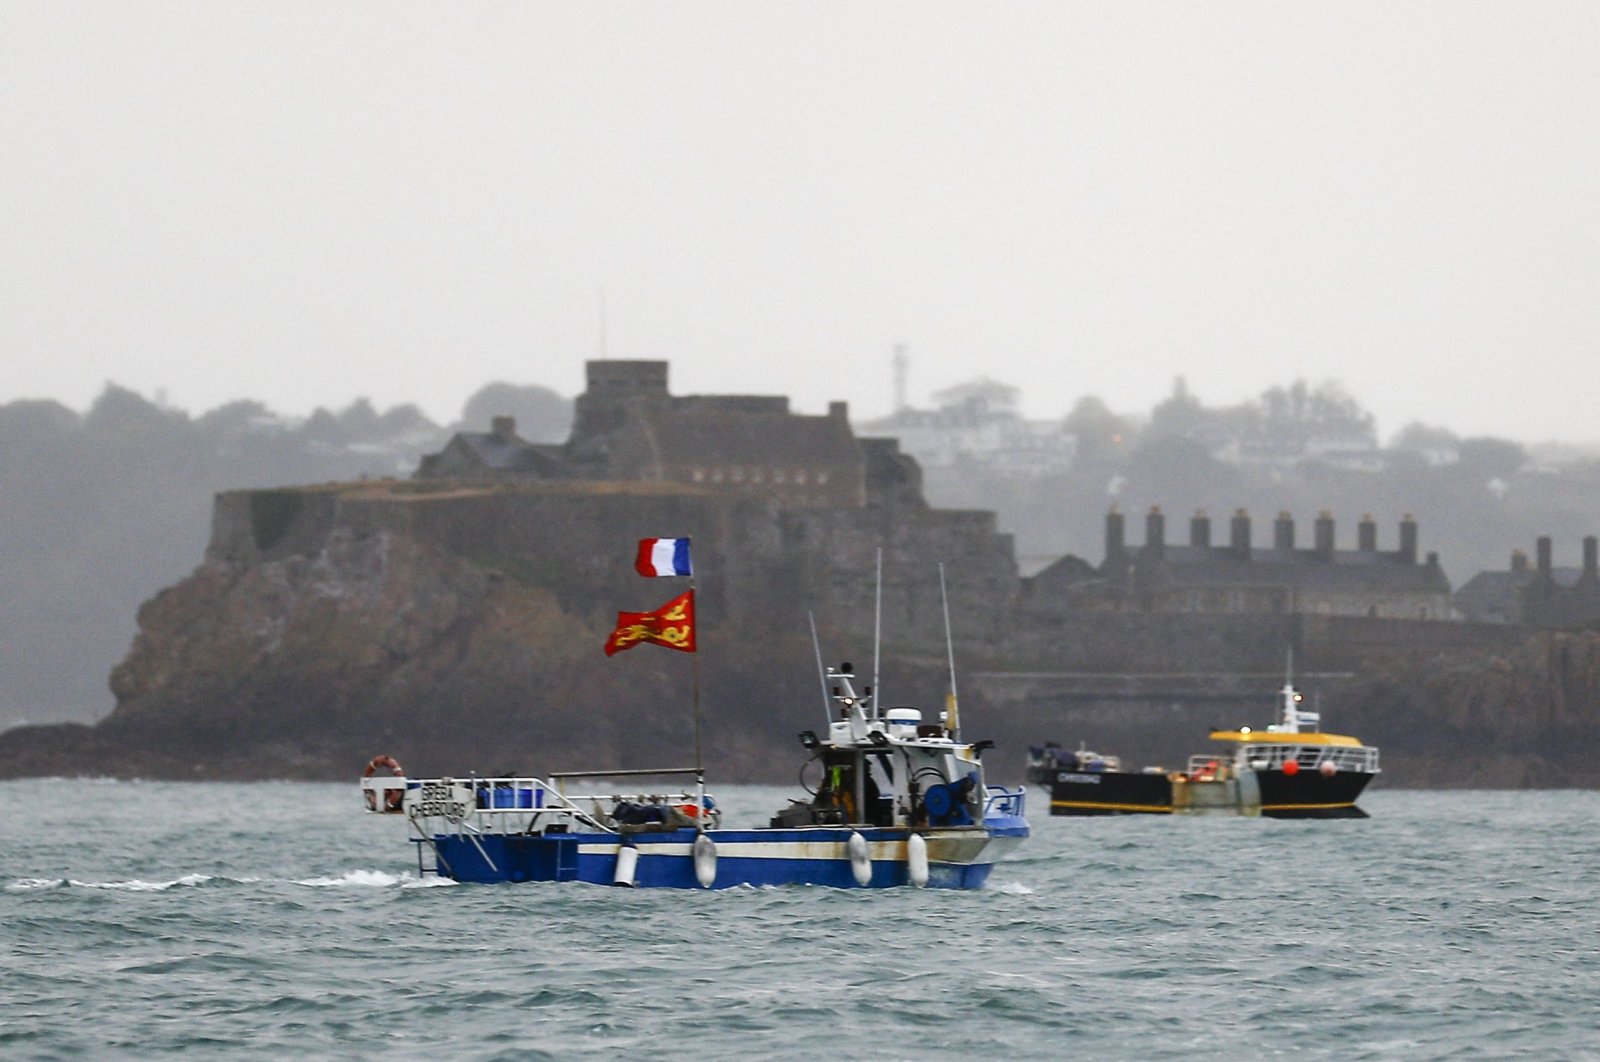 French fishing boats protest in front of the port of Saint Helier off the British island of Jersey to draw attention to what they see as unfair restrictions on their ability to fish in UK waters after Brexit, Jersey, United Kingdom, May 6, 2021. (AFP Photo)